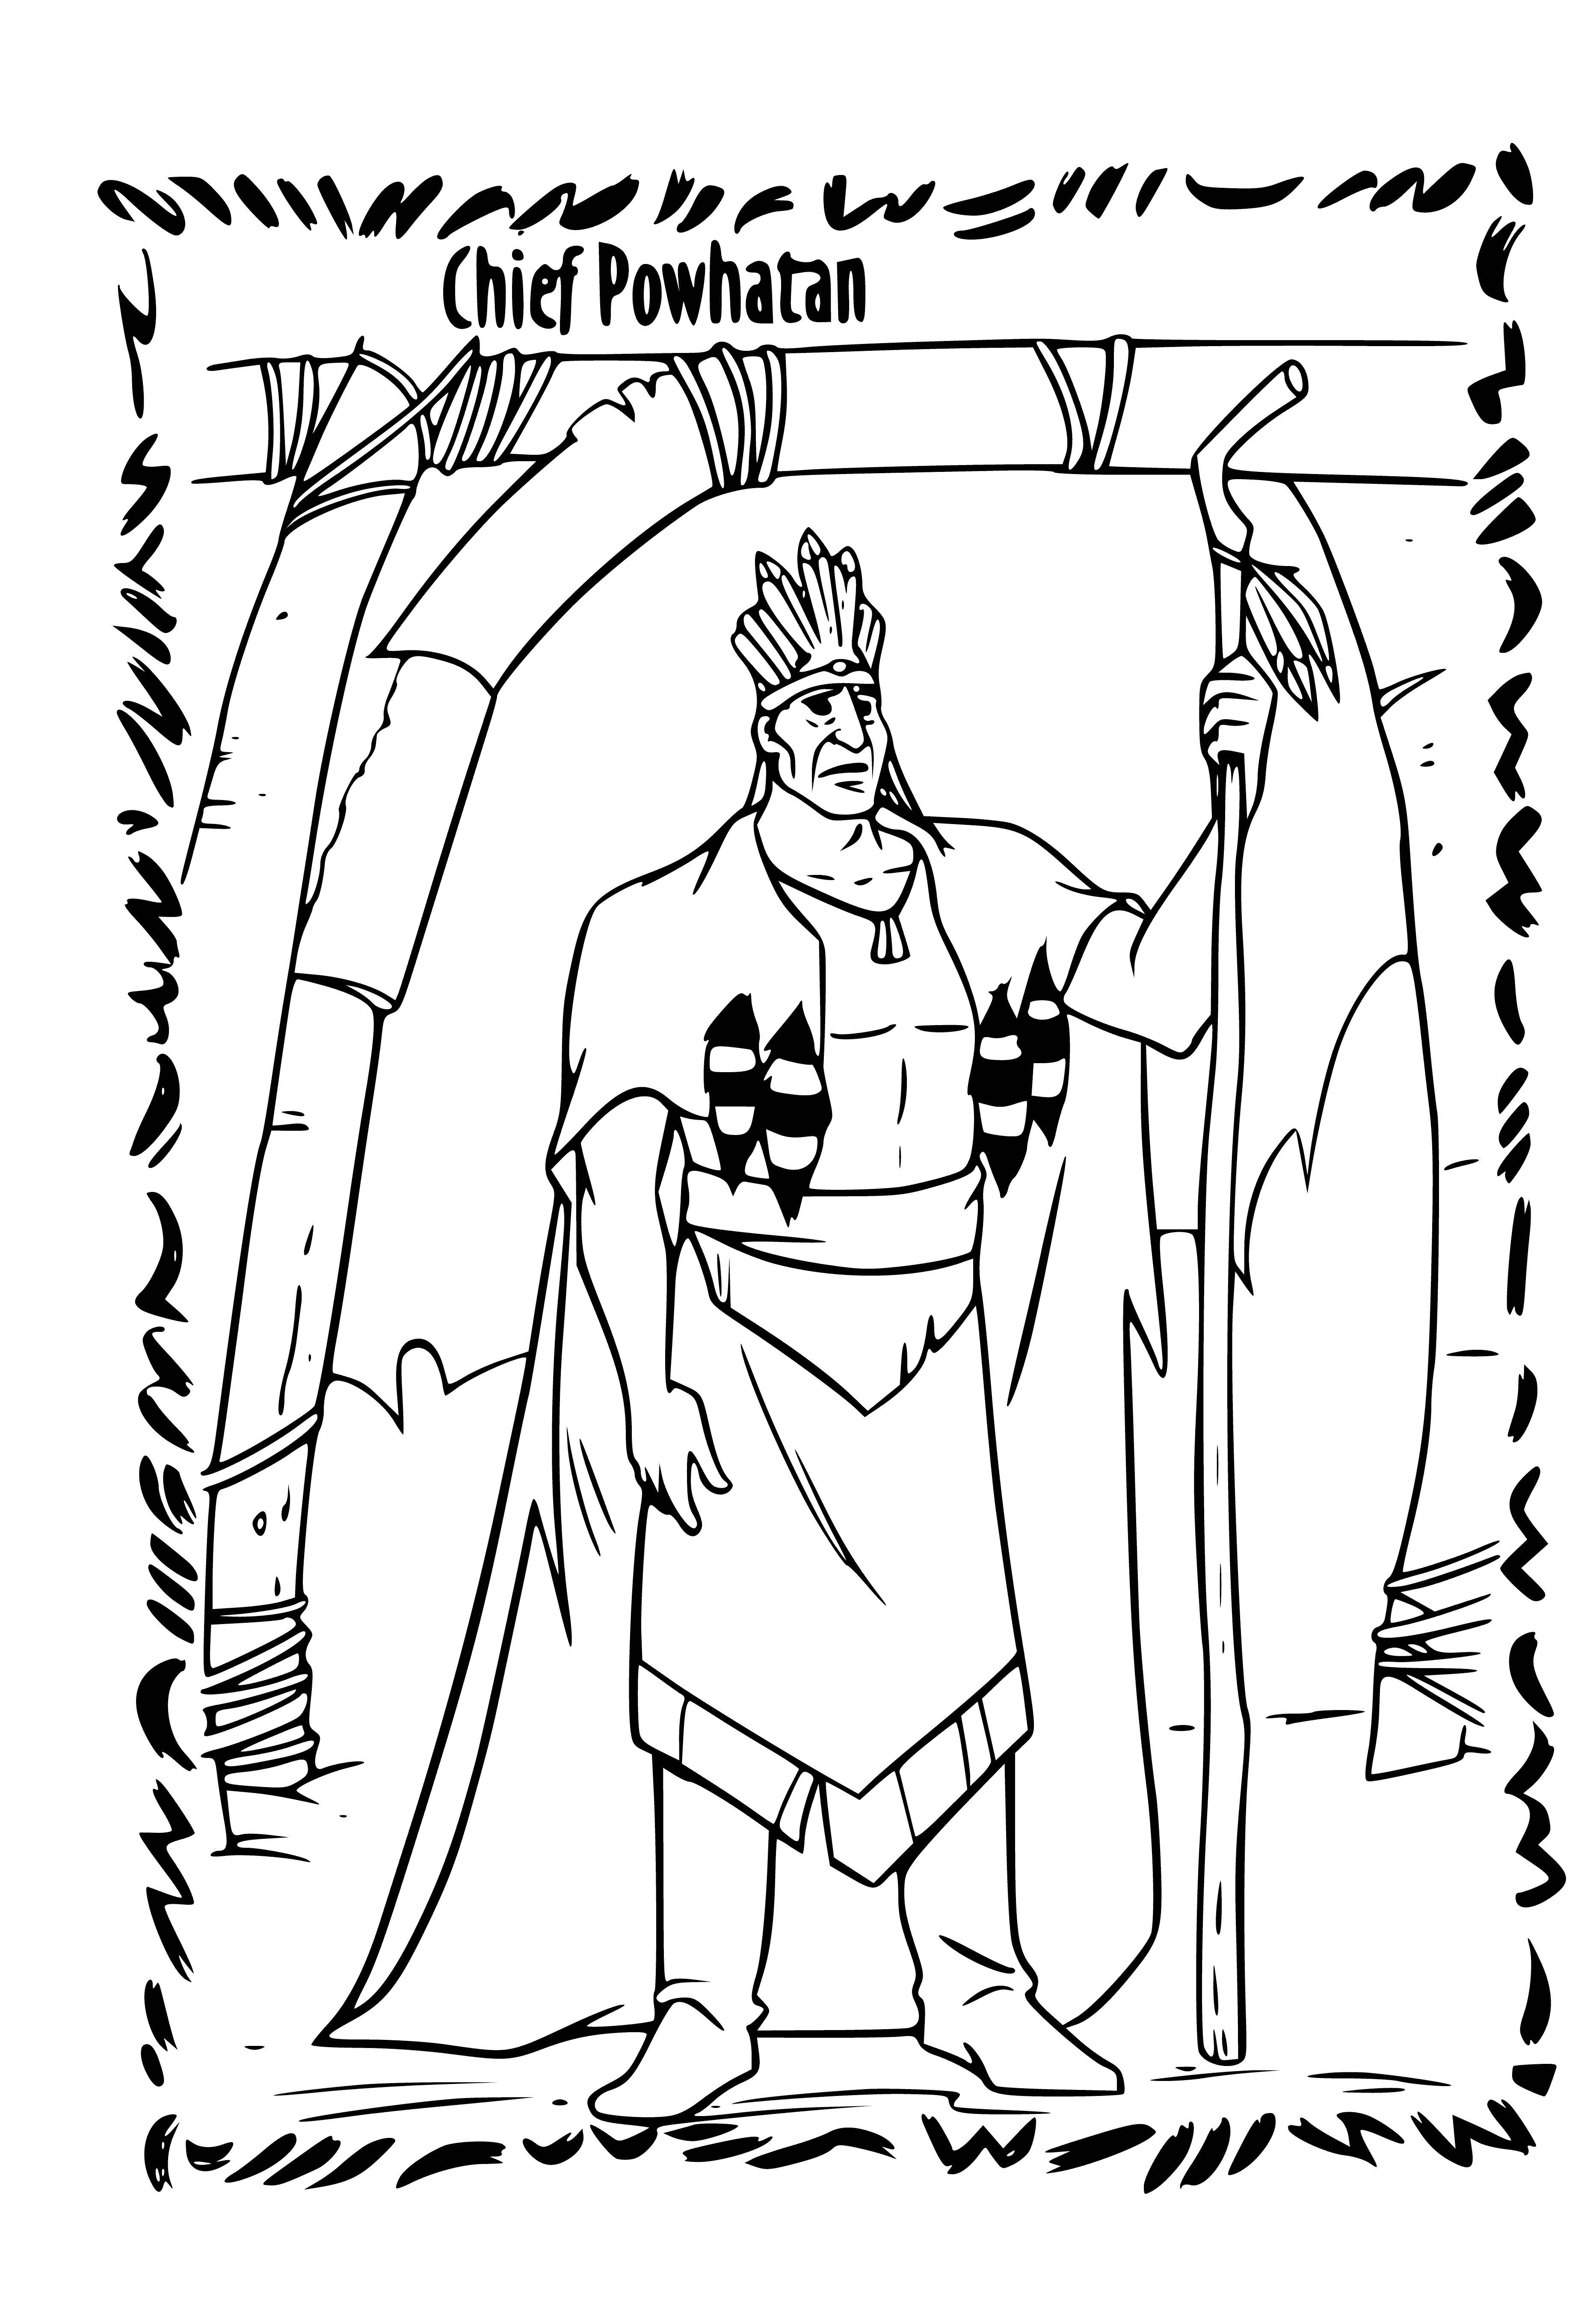 coloring page: Pocahontas, seated on ground with crossed legs, wears brown dress w/ fringed bottom; dark hair pulled back, feathers in it. Looks off to the side.